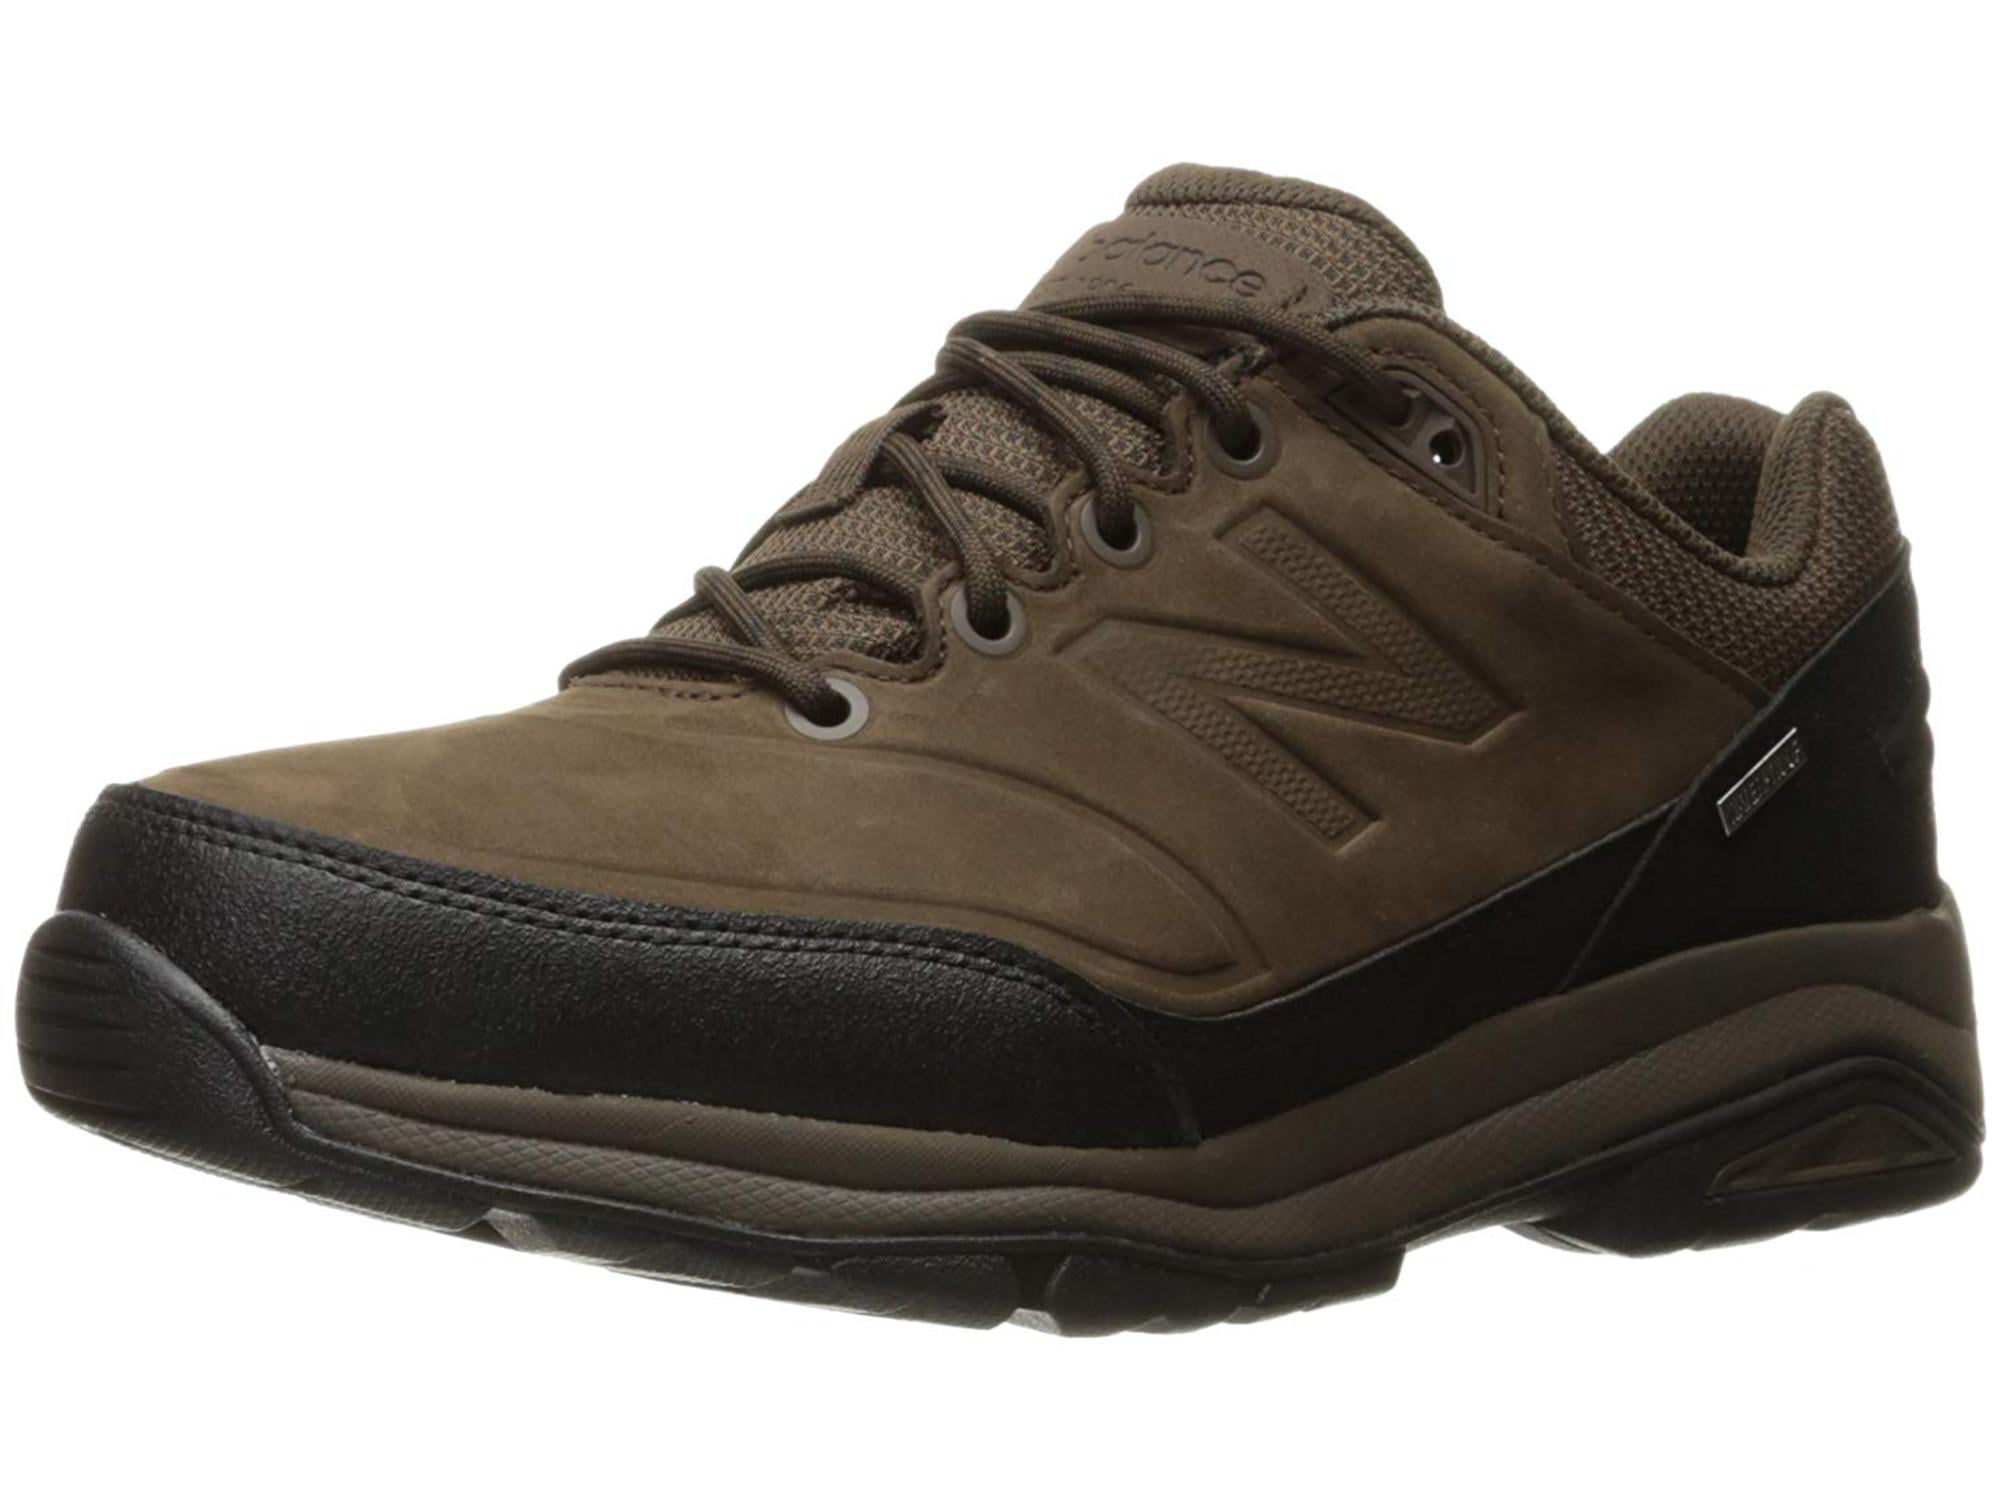 Lucht behandeling Waterig New Balance Mens 1300 Country Walker Leather Low Top Lace, Chocolate, Size  15.0 - Walmart.com